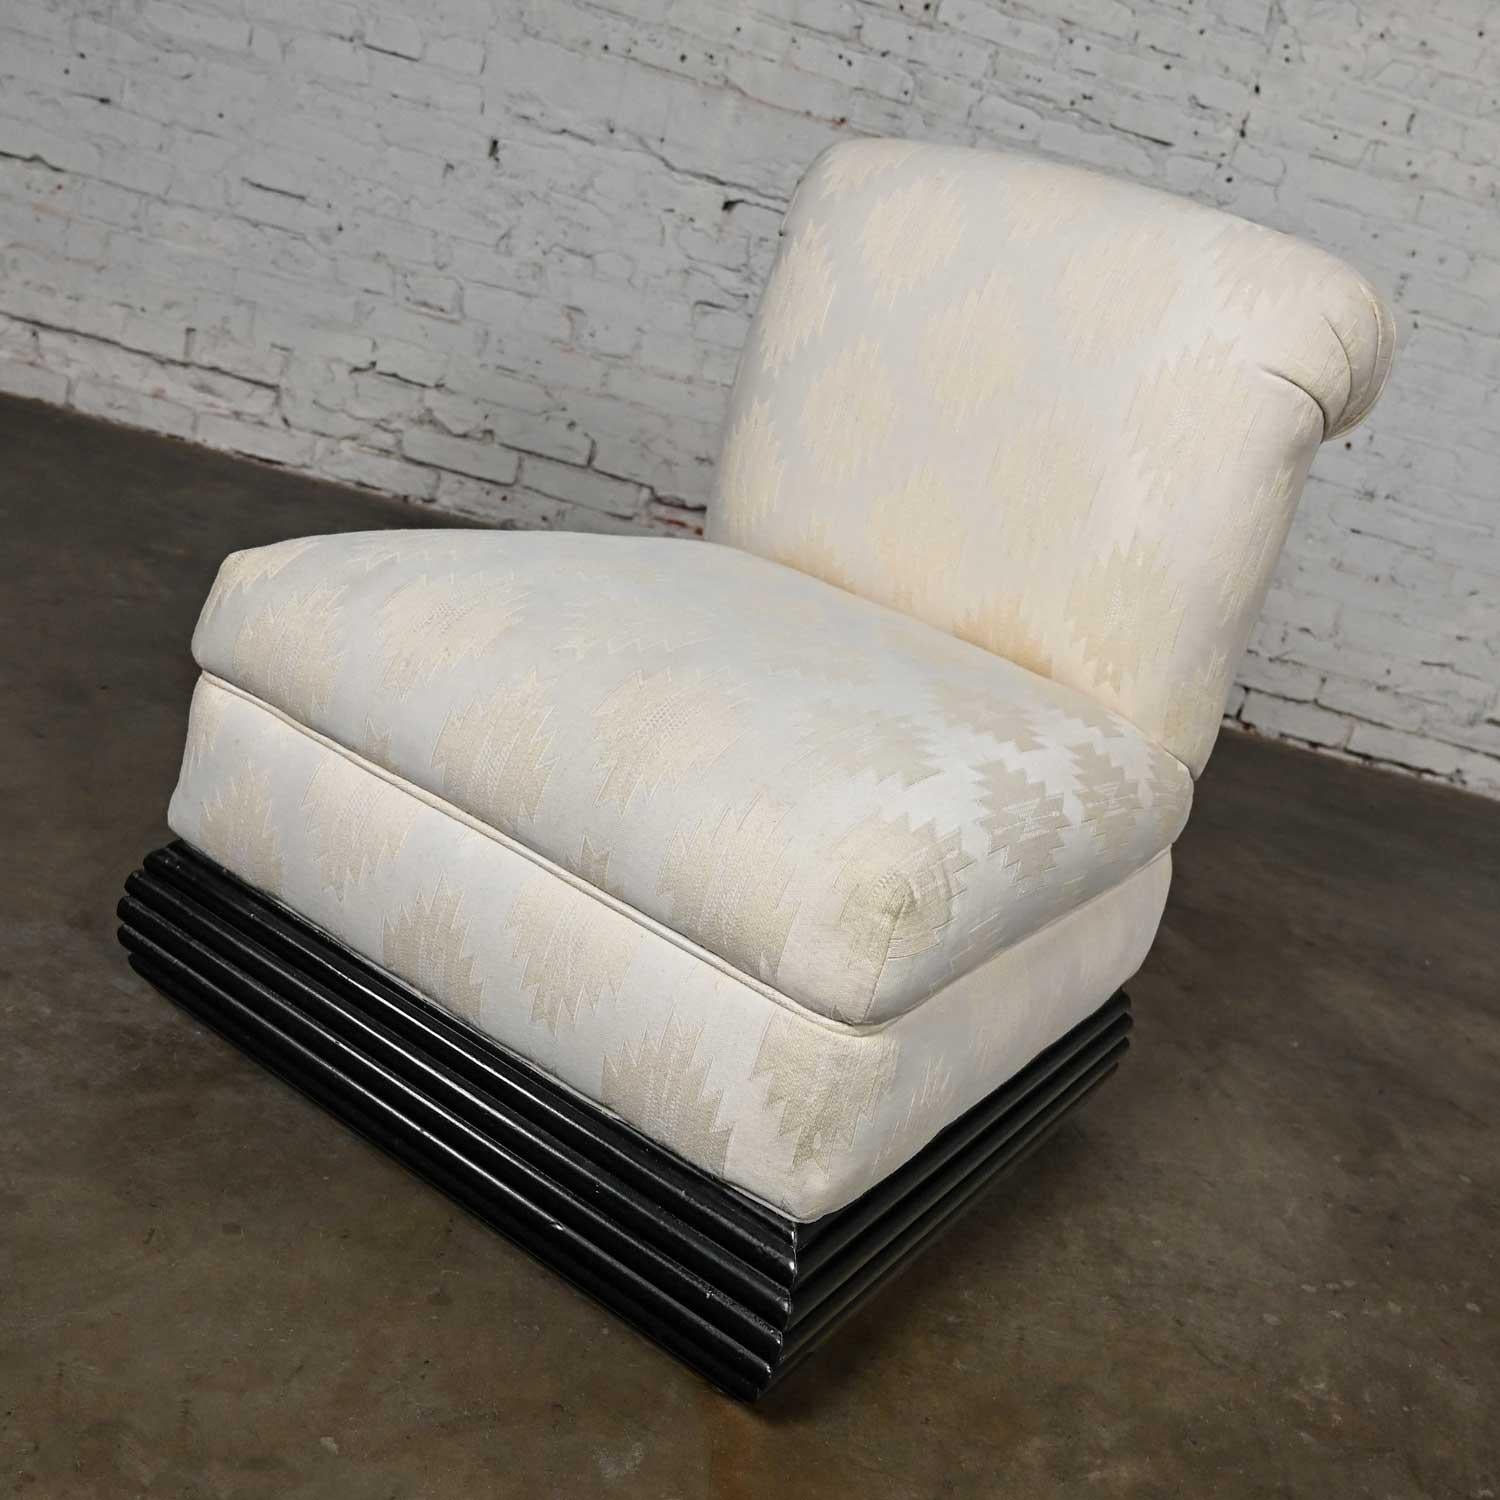 Late 20th Art Deco Revival off White Slipper Chair Rolled Back & Black Wood Base For Sale 1